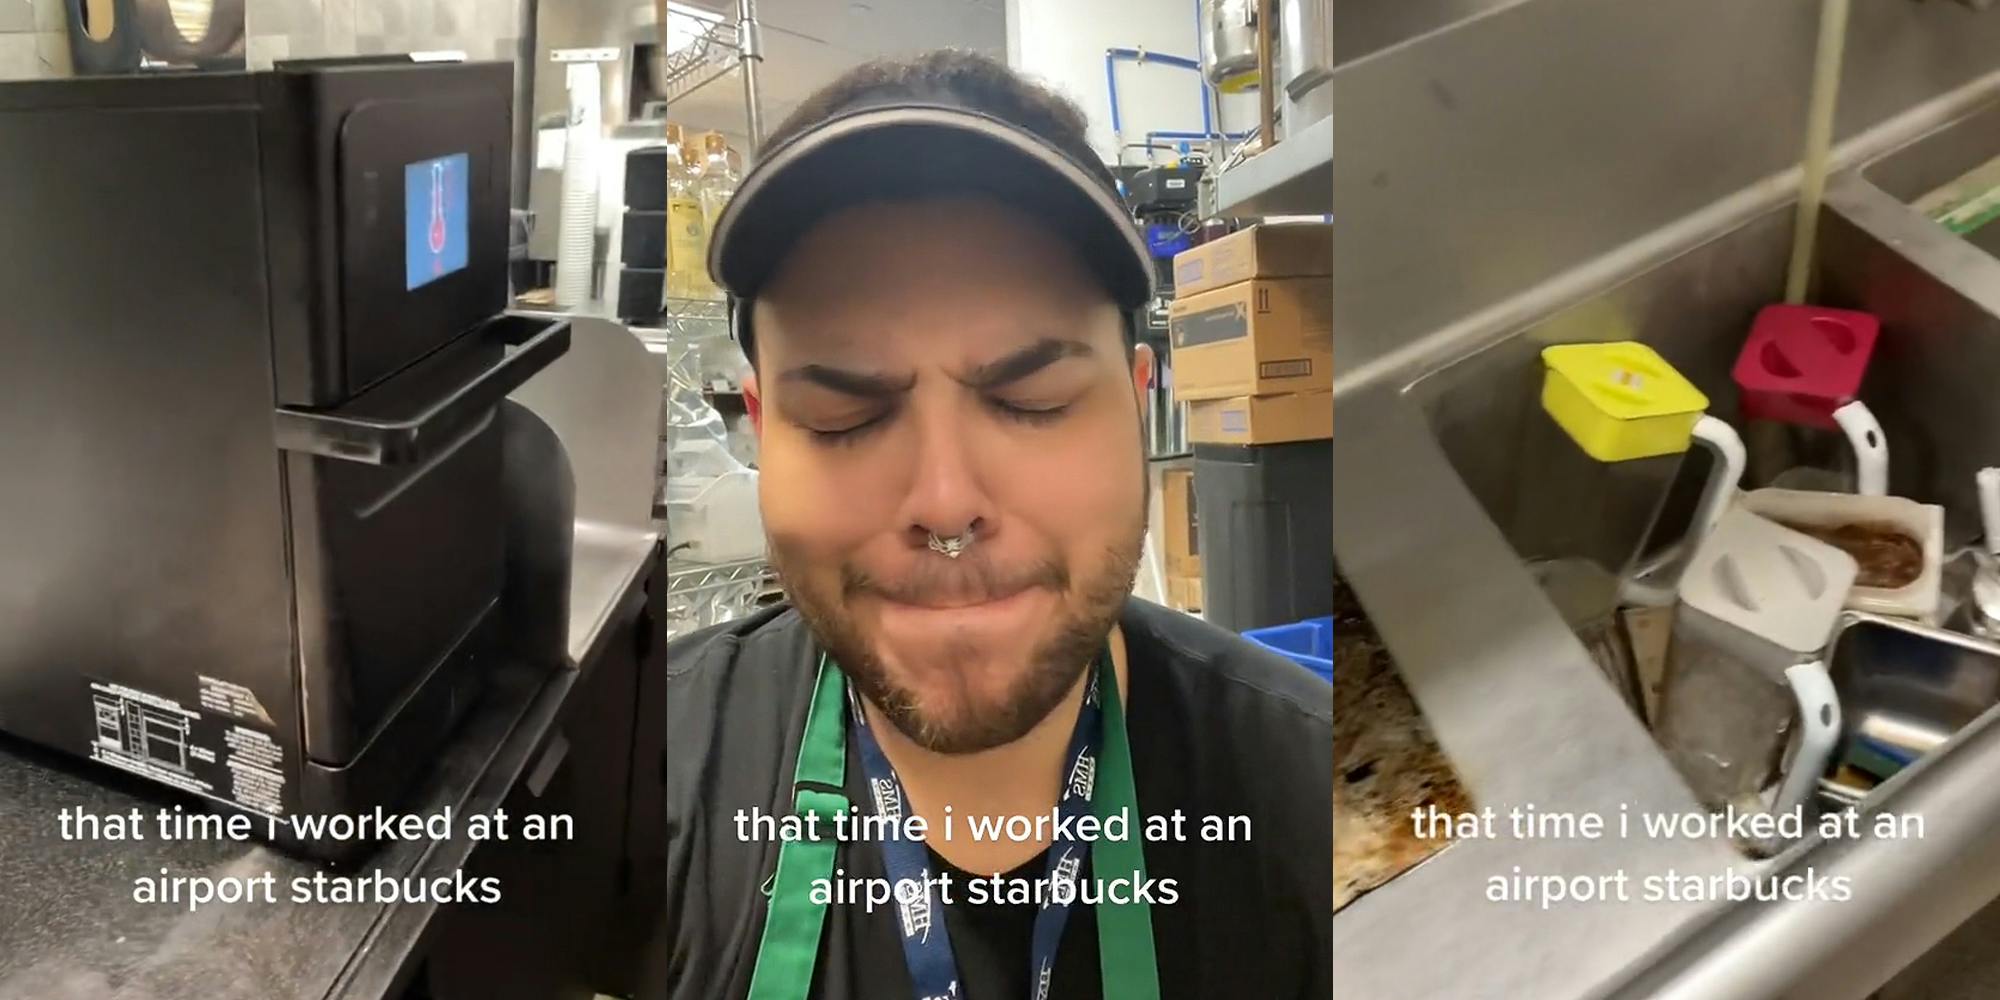 Starbucks machine with steam coming out of it caption "that time i worked at an airport starbucks" (l) Starbucks barista eyes closed sucking in mouth caption "that time i worked at an airport starbucks" (c) Starbucks sink full of dirty dishes caption "that time i worked at an airport starbucks" (r)